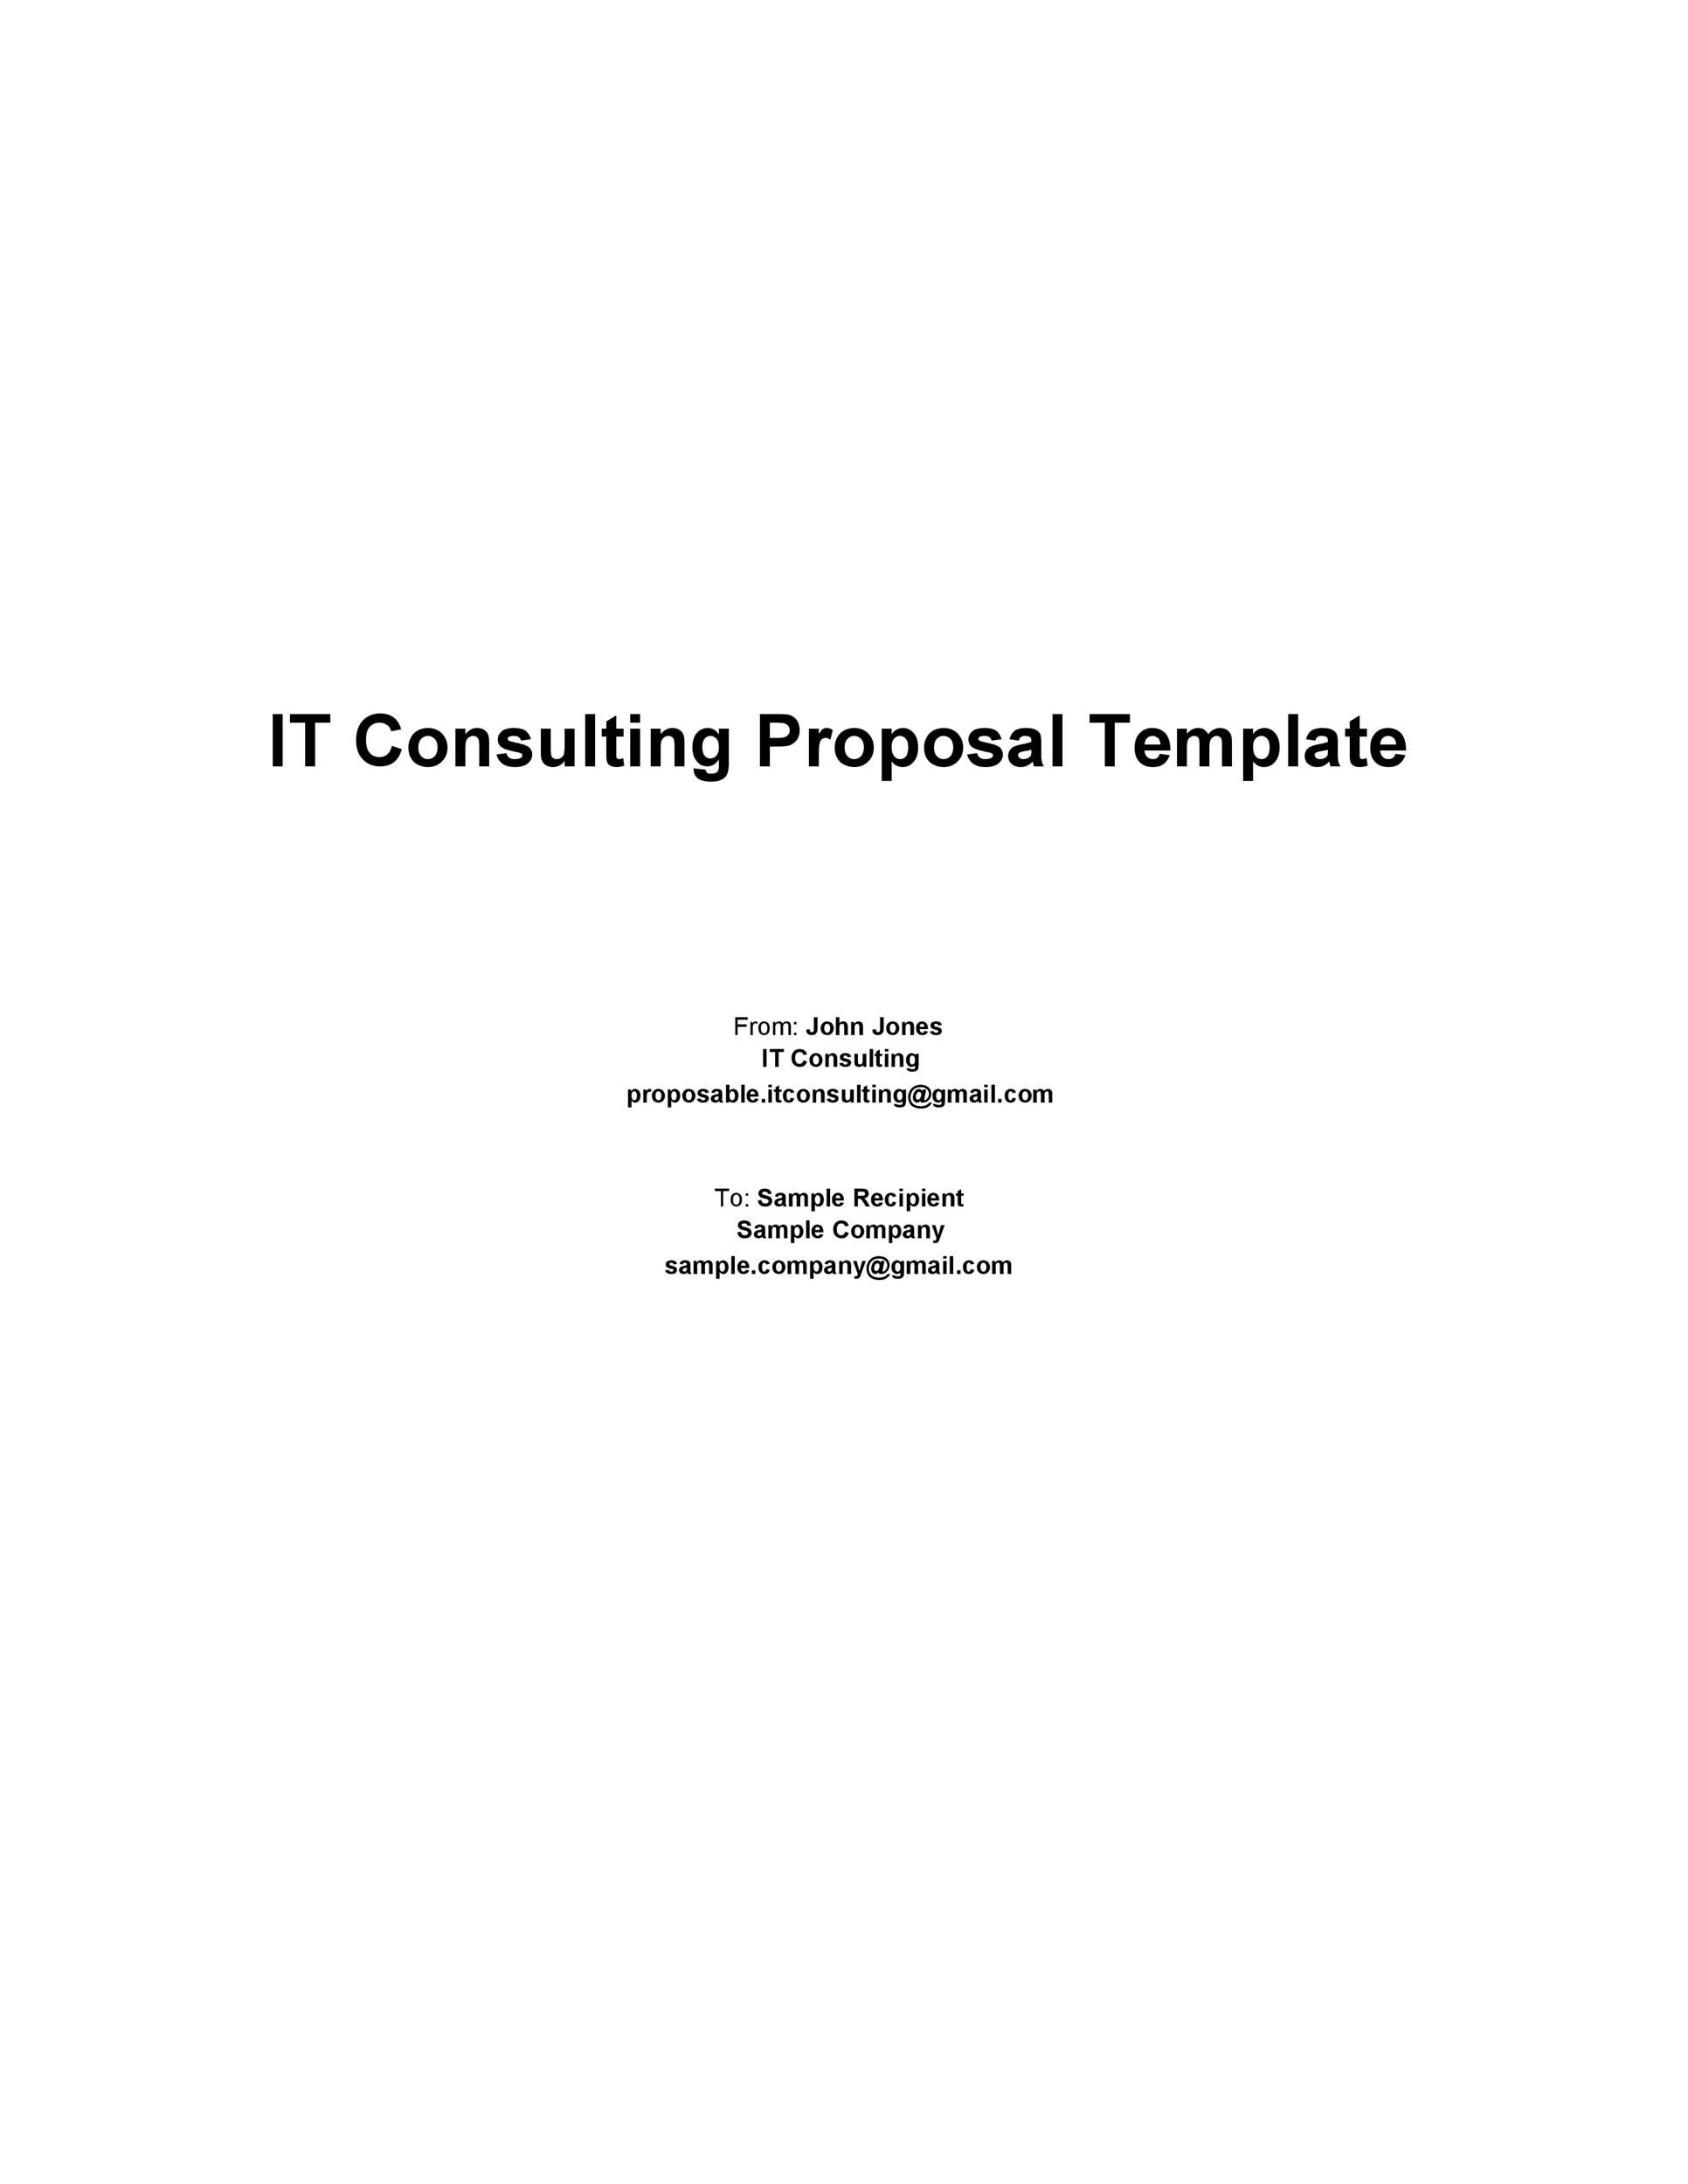 Free consulting proposal template 06